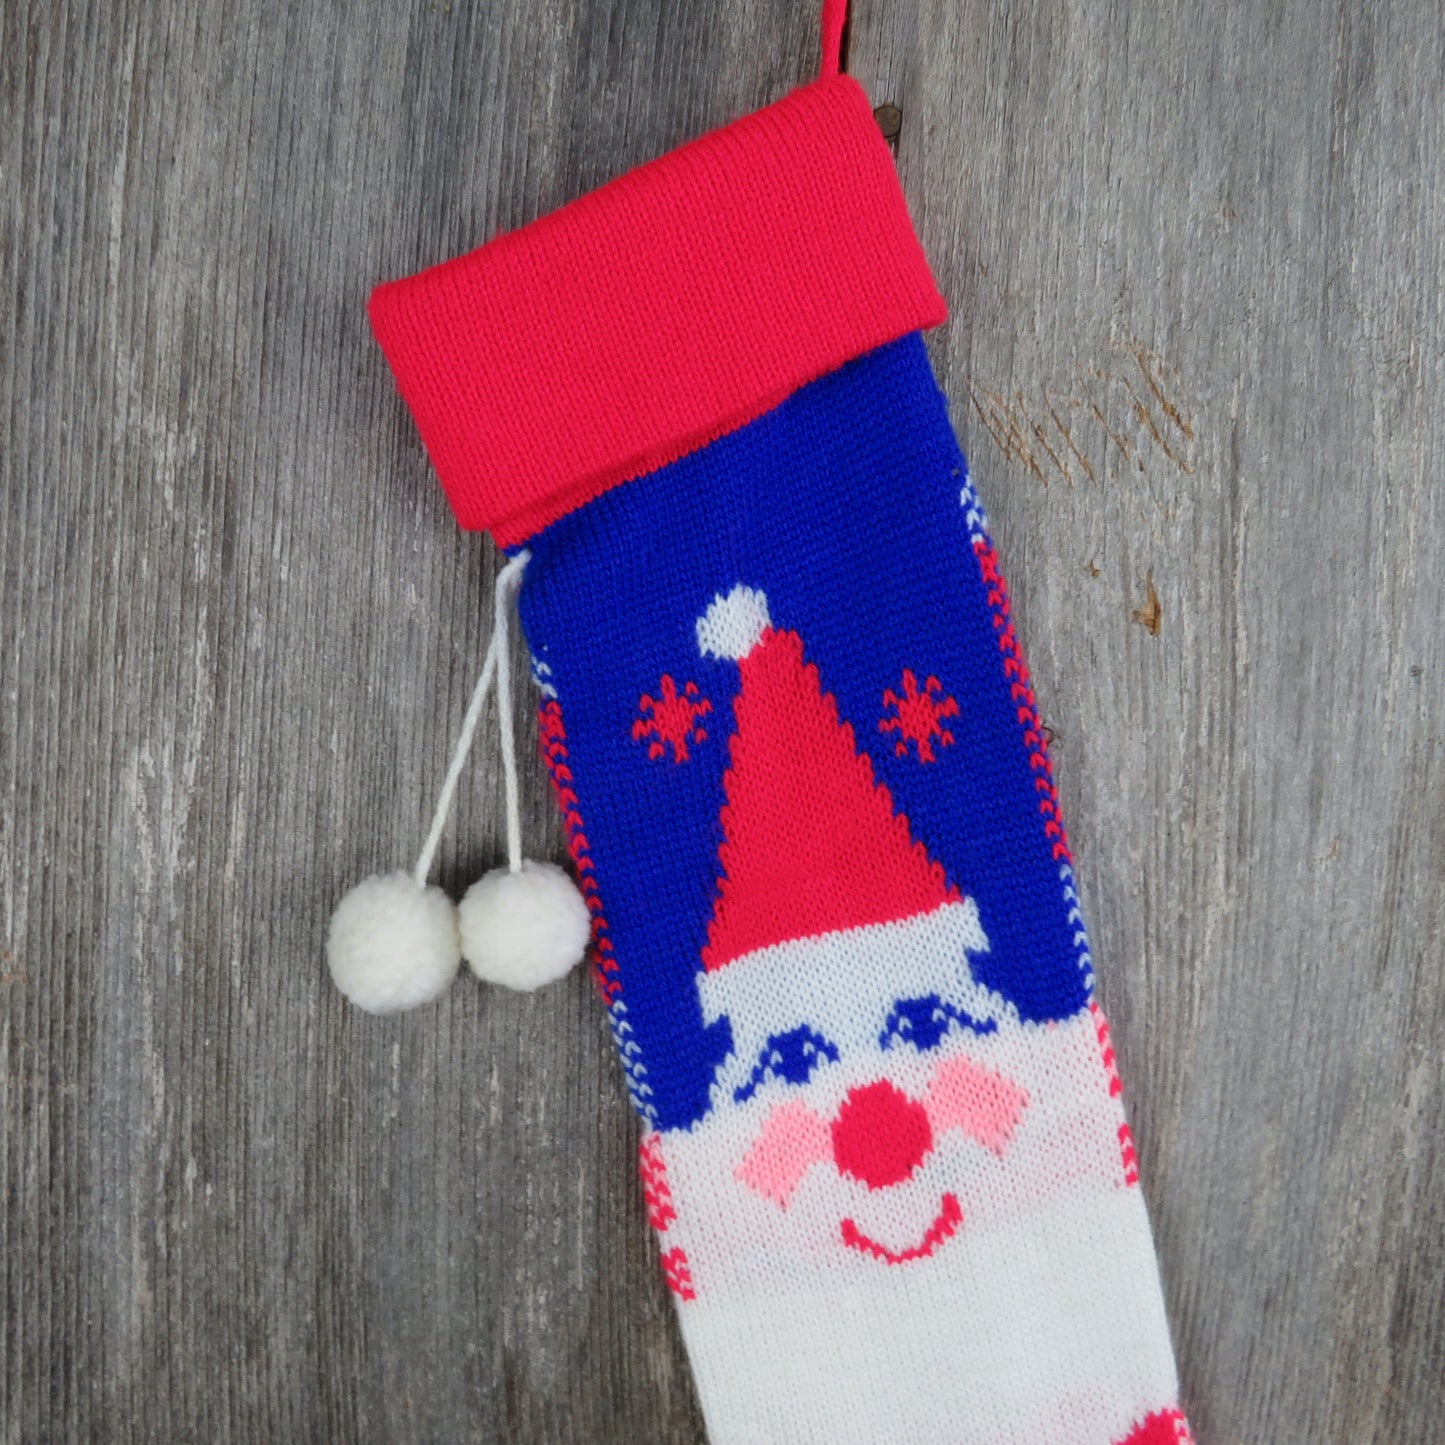 Vintage Santa Claus Knit Stocking Christmas Clown Red Nose Knitted Blue Red White Pom Pom